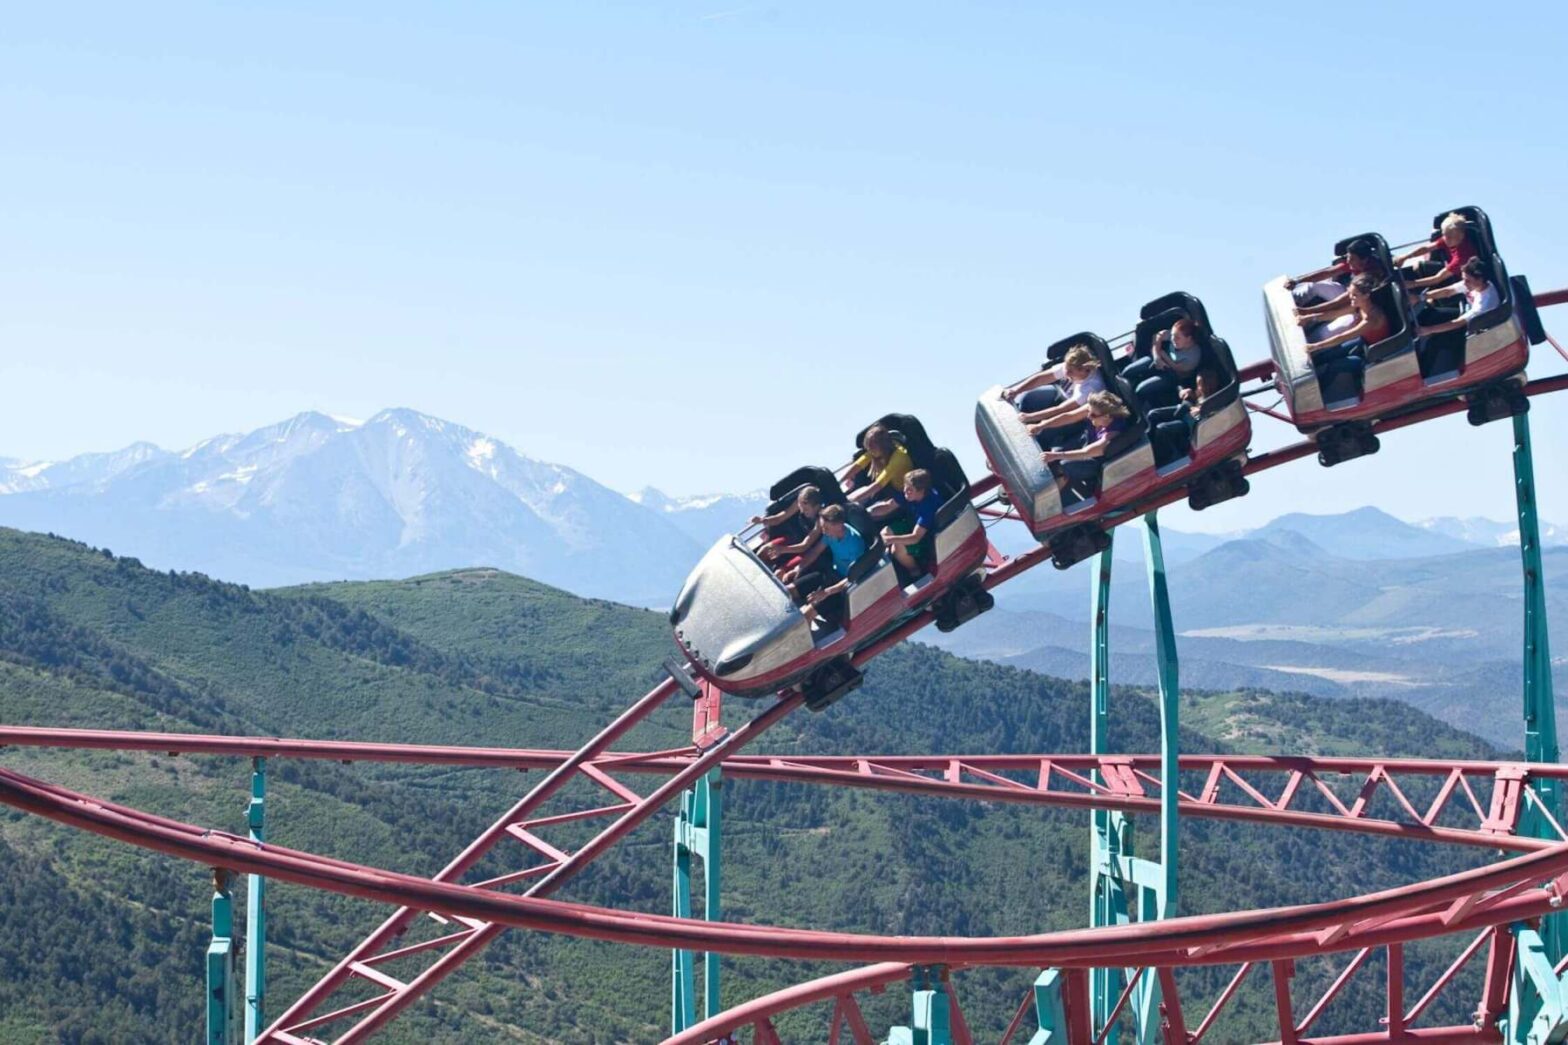 Thrill Seekers Rejoice! Colorado Has The Highest Rollercoaster In The U.S.